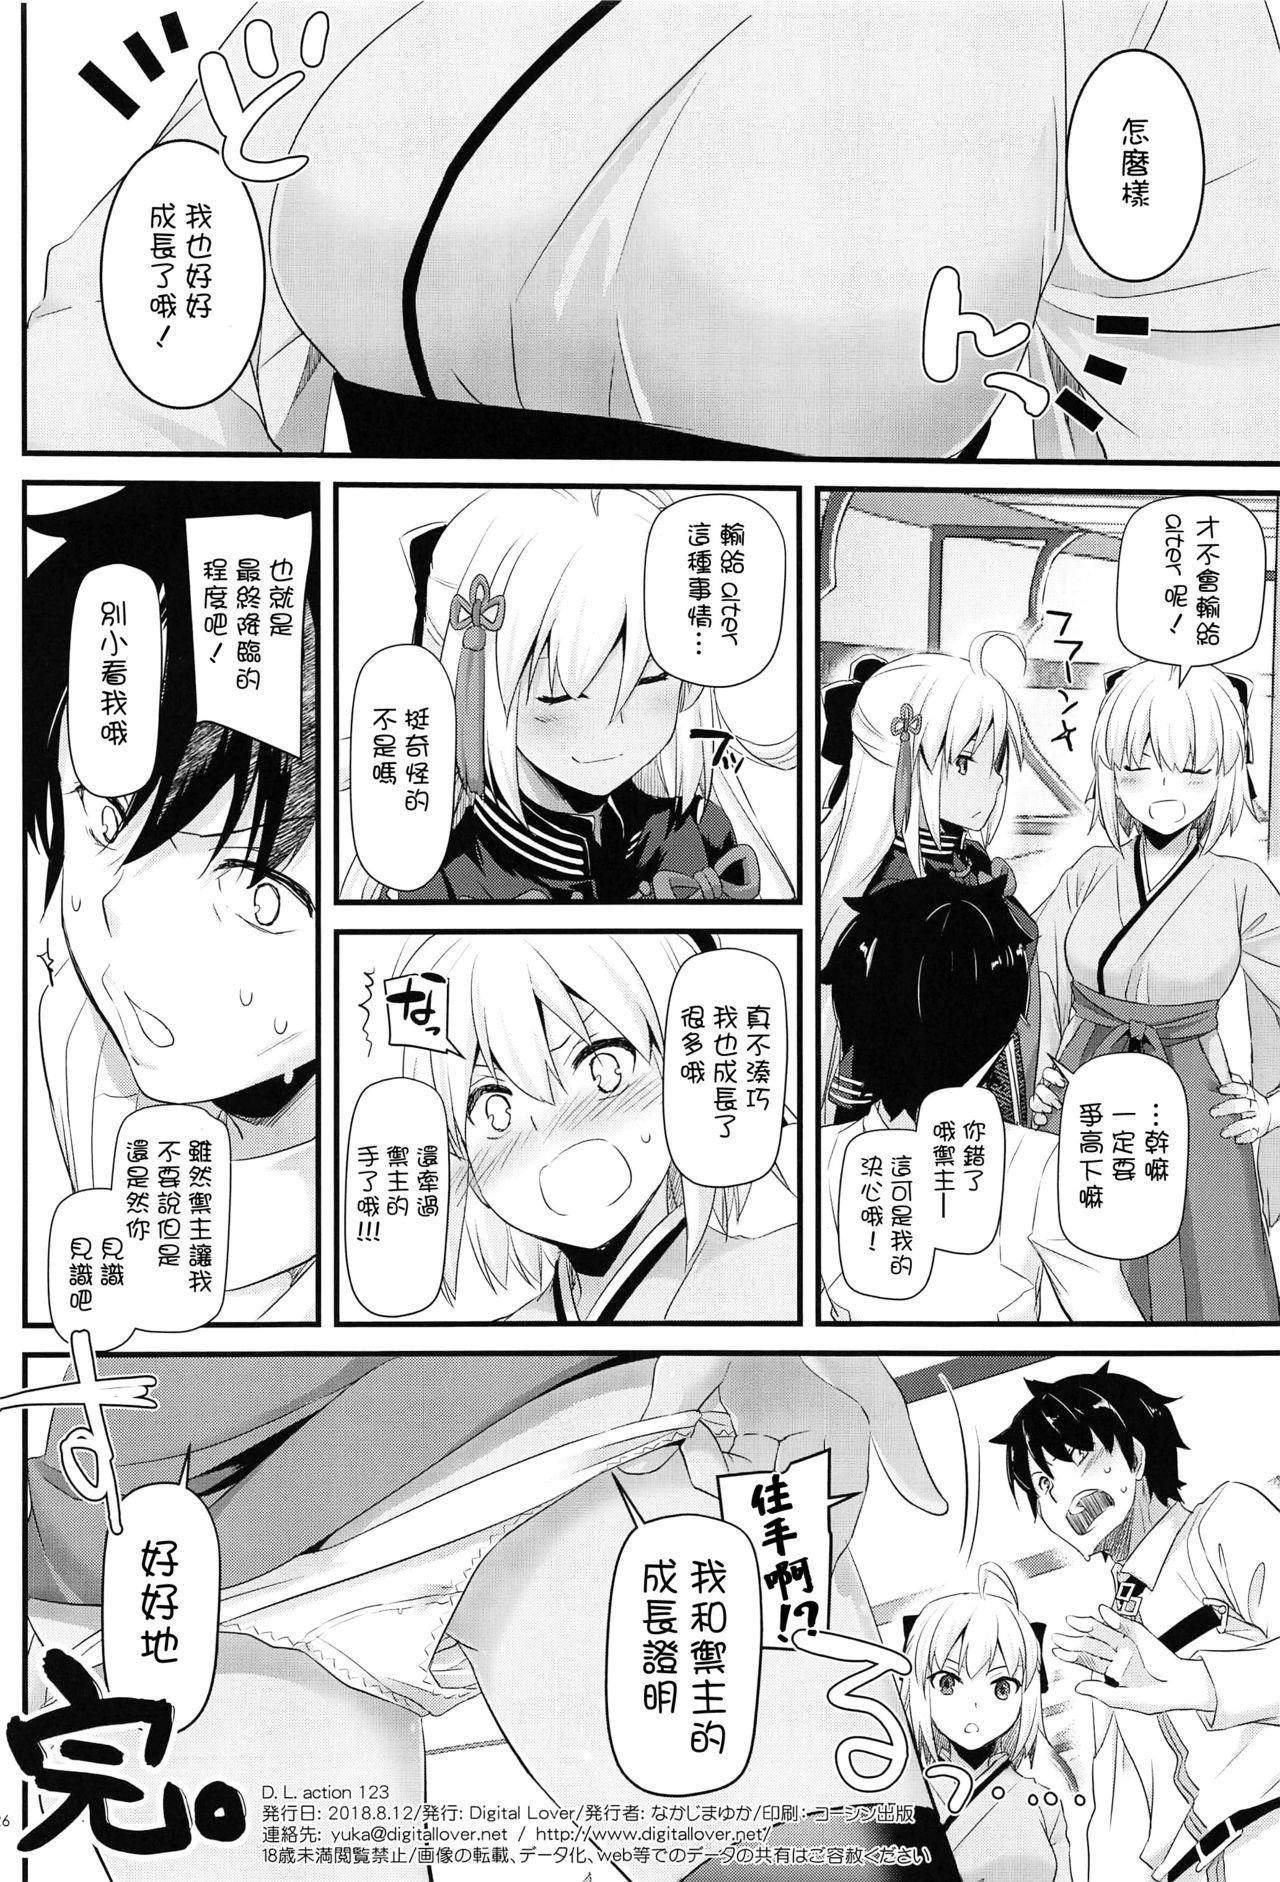 Masturbandose D.L. action 123 - Fate grand order Sextoy - Page 26